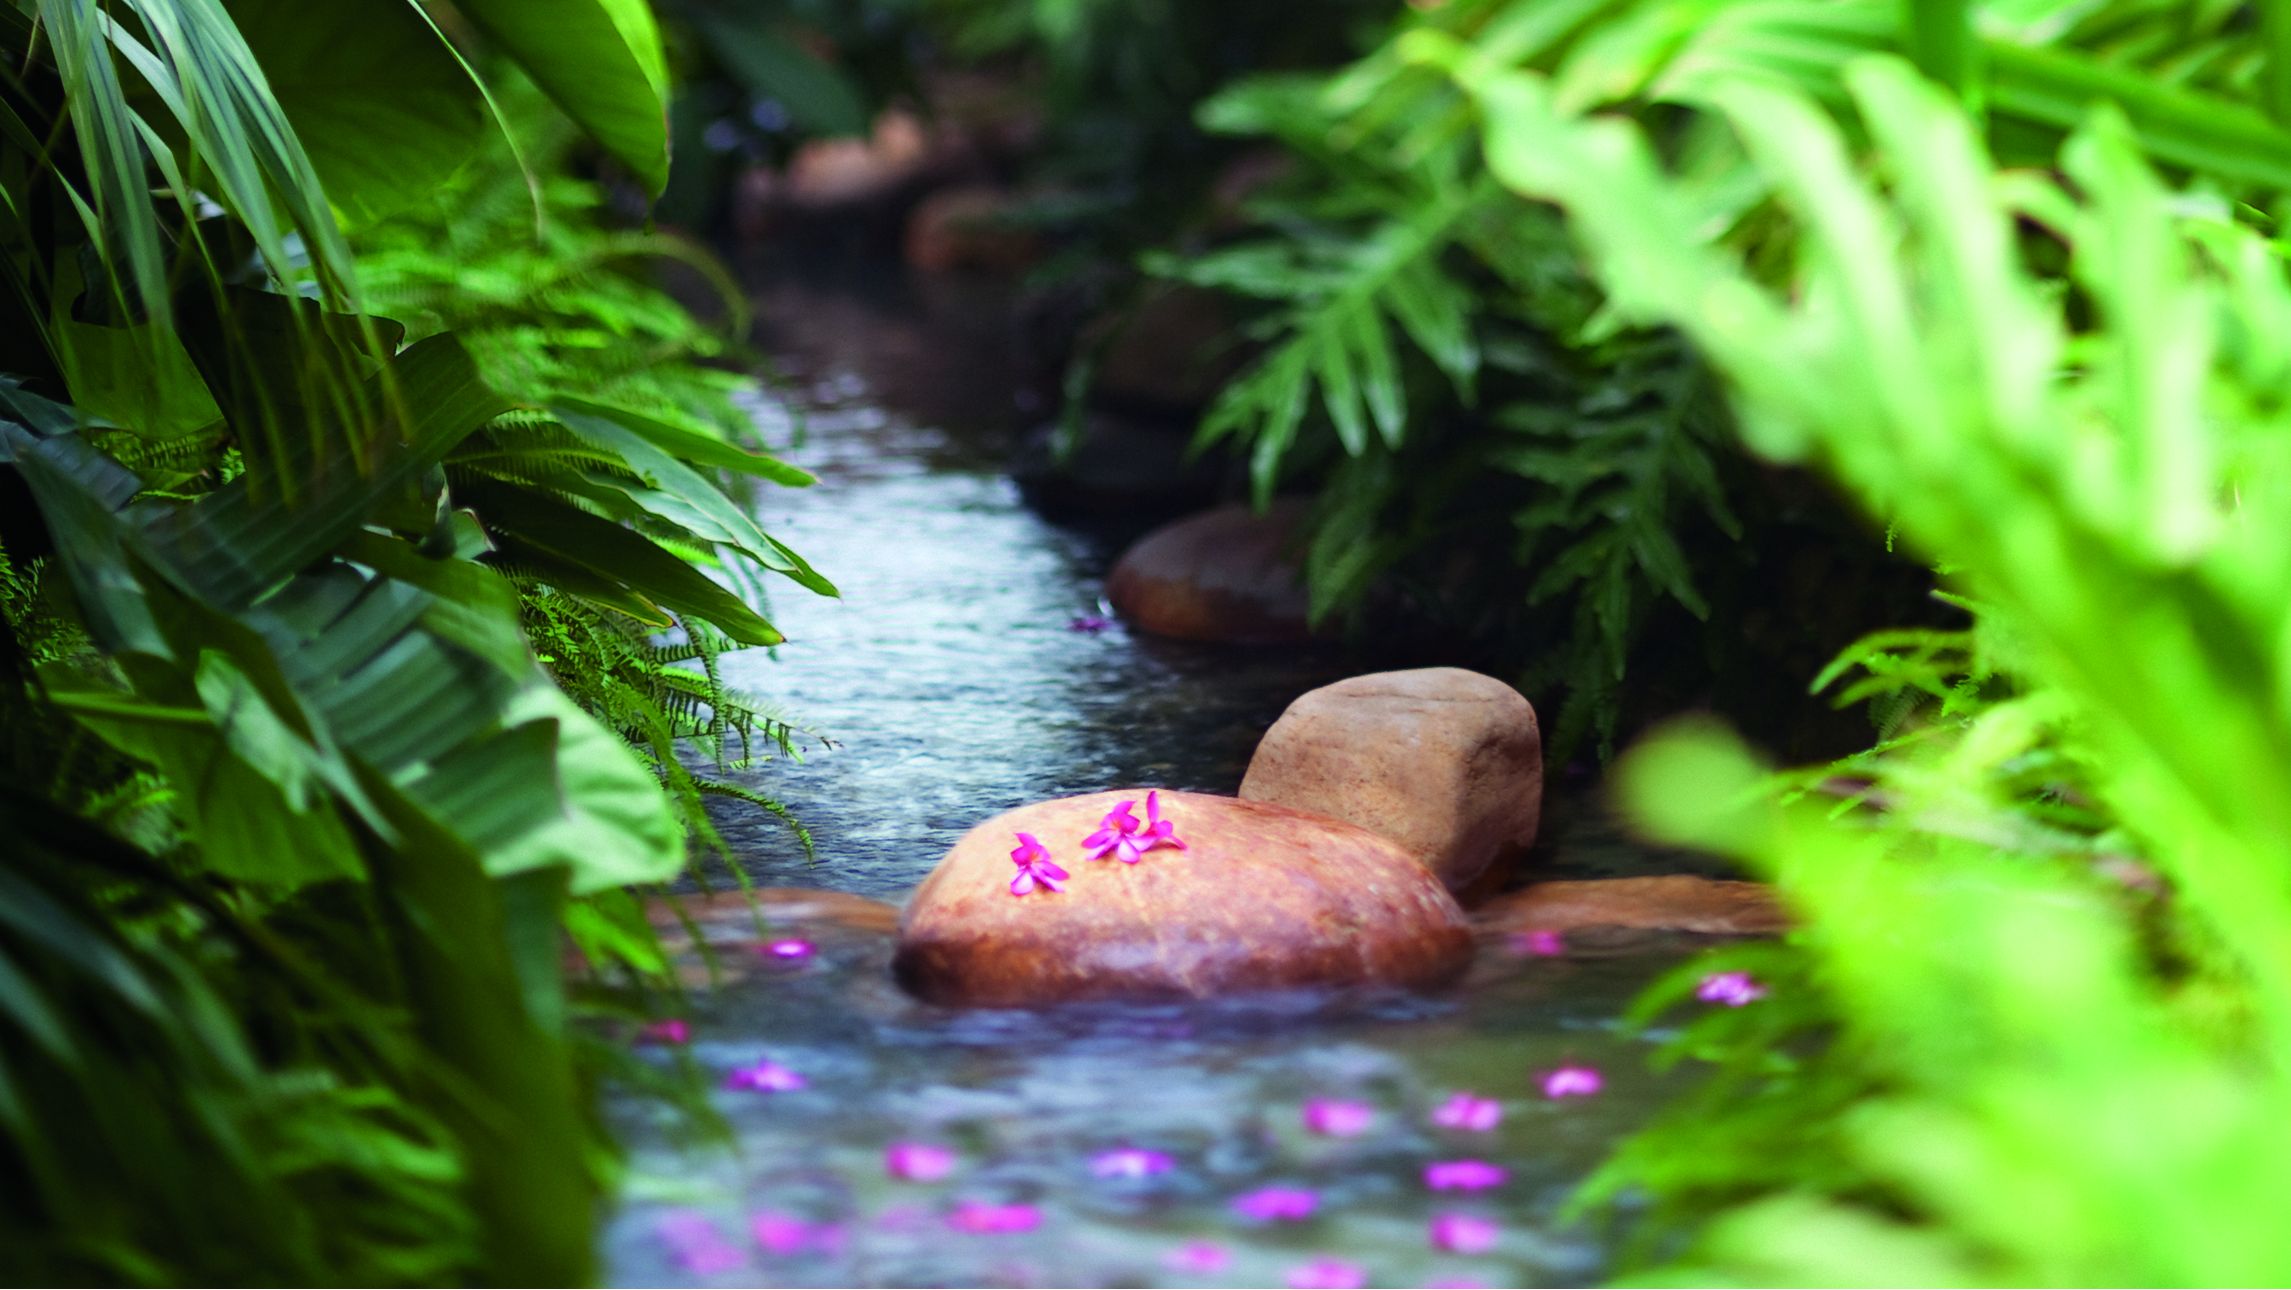 Stream strewn with flower petals and surrounded by greenery